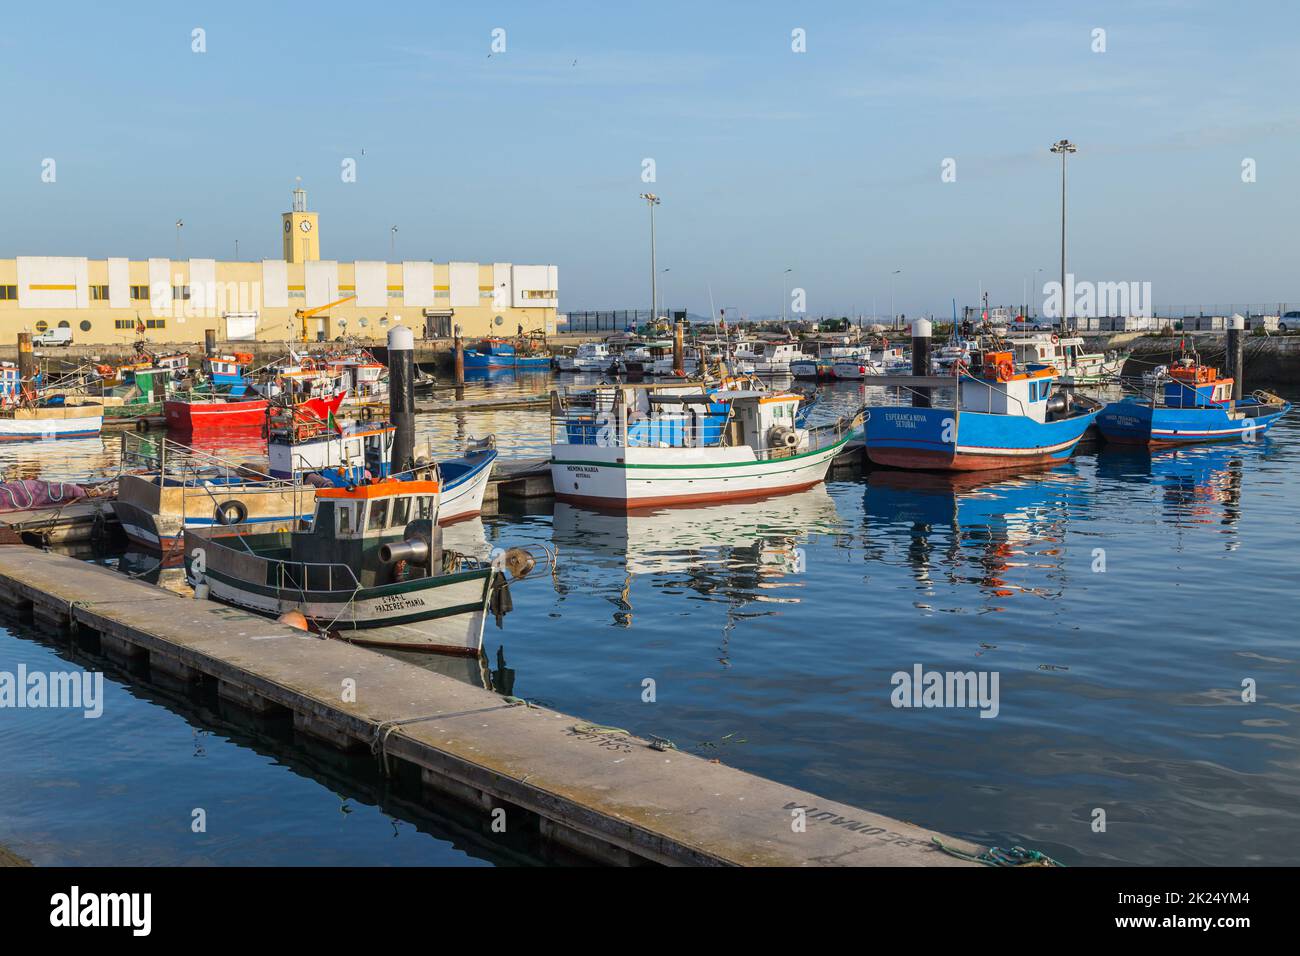 Sesimbra, Portugal - 13 March 2022: view of the harbor and village of Sesimbra in Portugal with colorful fishing boats Stock Photo